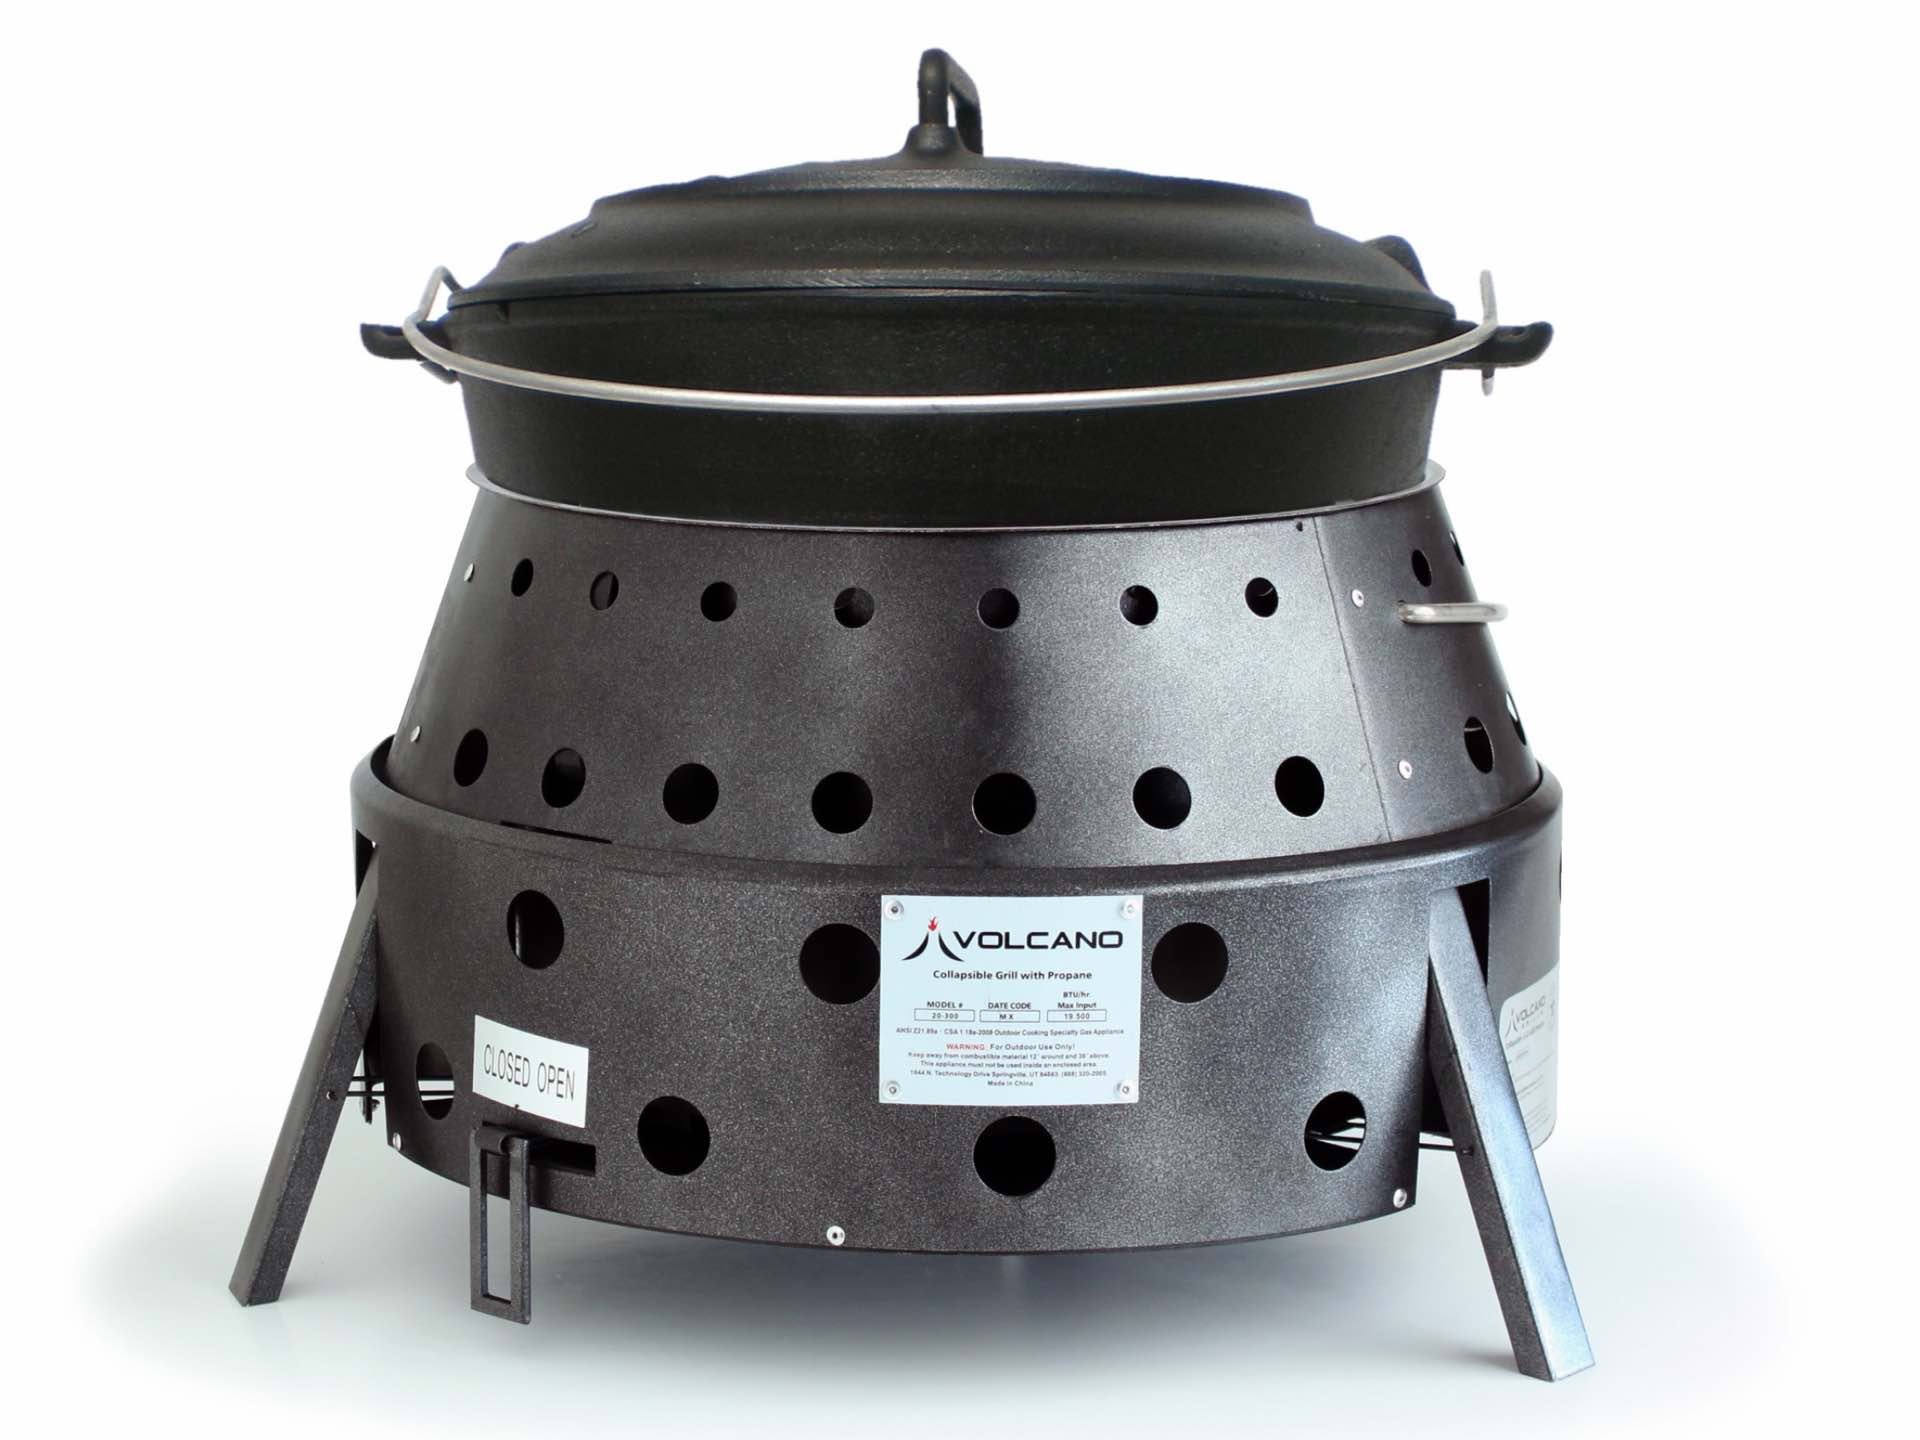 volcano-grills-cast-iron-dutch-oven-in-stove